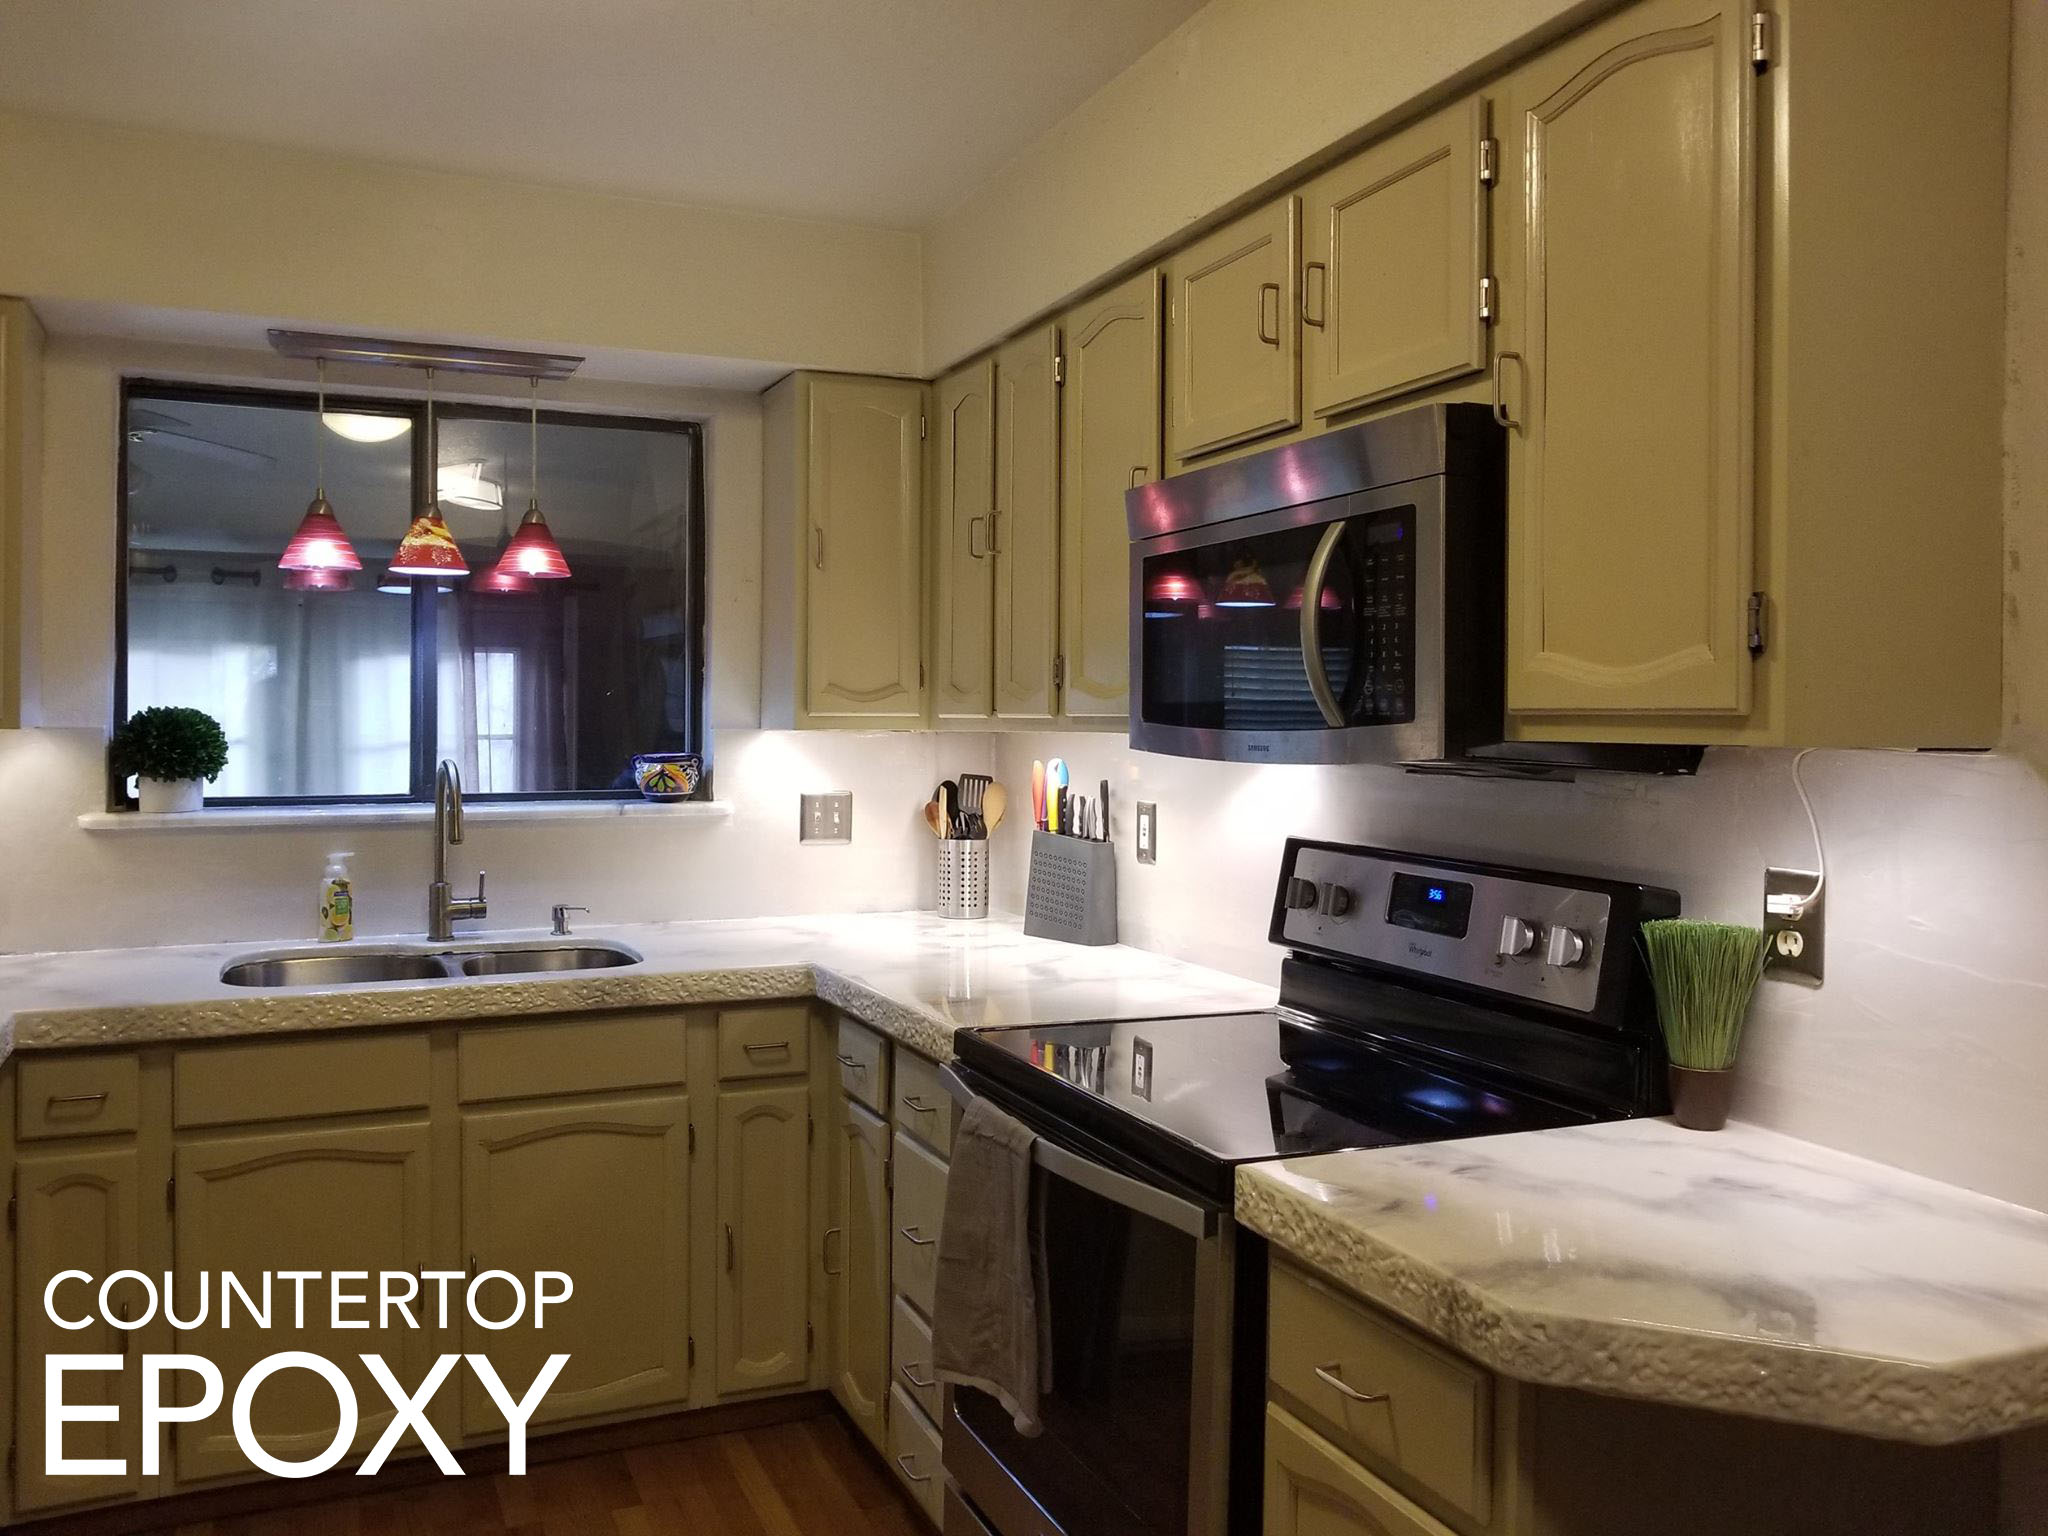 11 Diy Ideas To Update Your Ugly Rental Kitchen Counter Top Epoxy,Puppy Vomiting Roundworms